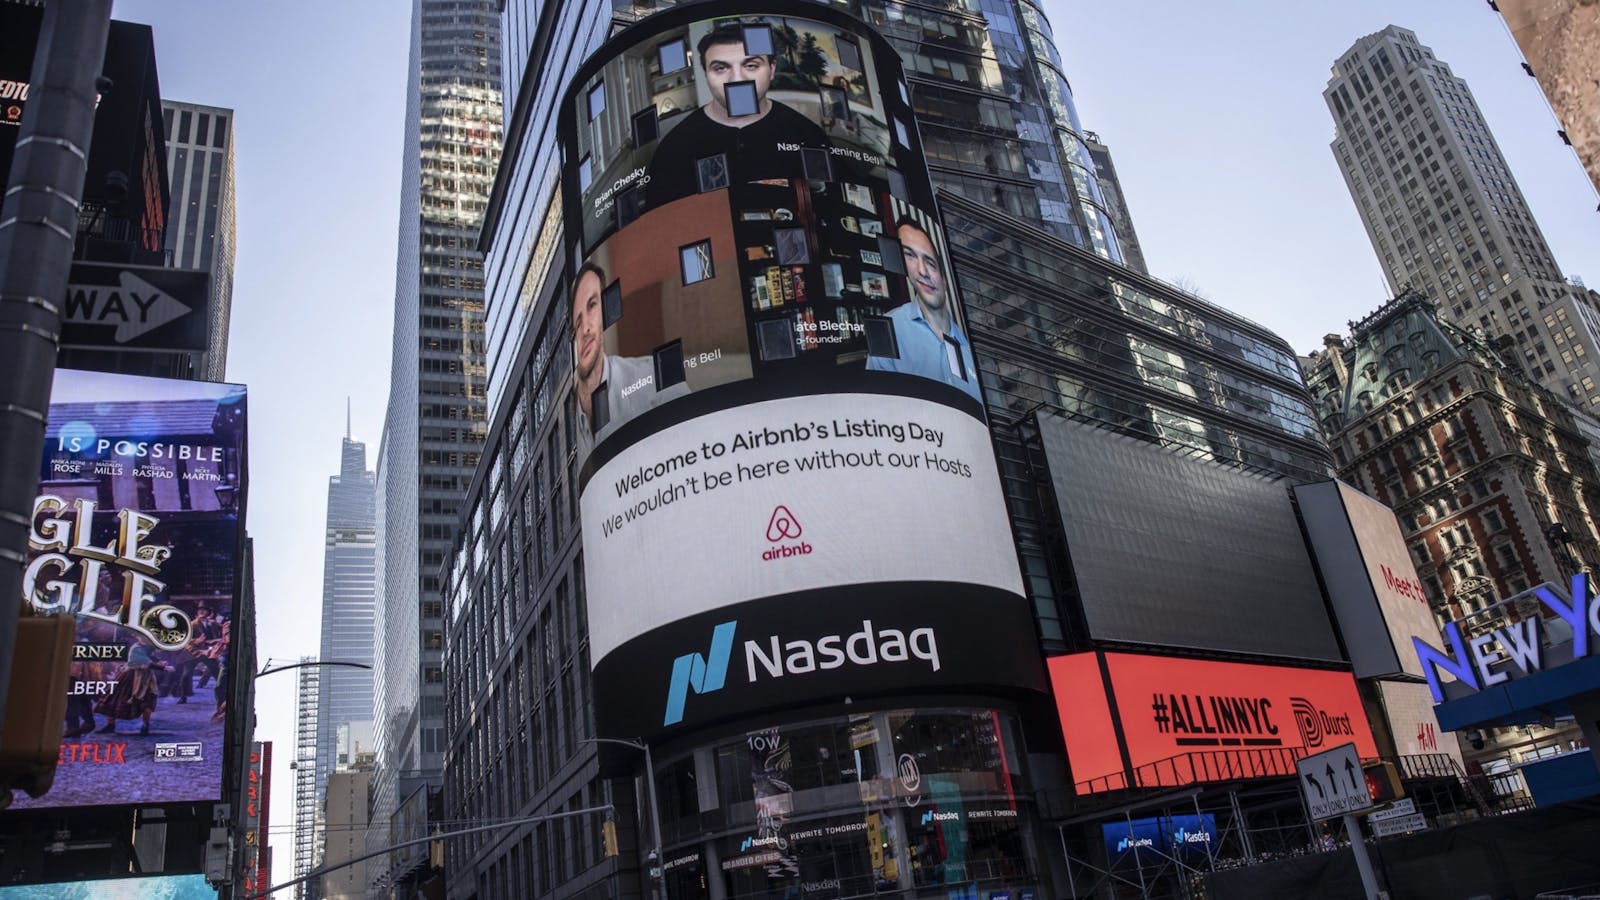 Airbnb's founders displayed on Nasdaq's Times Square screen in New York today. Photo by Bloomberg